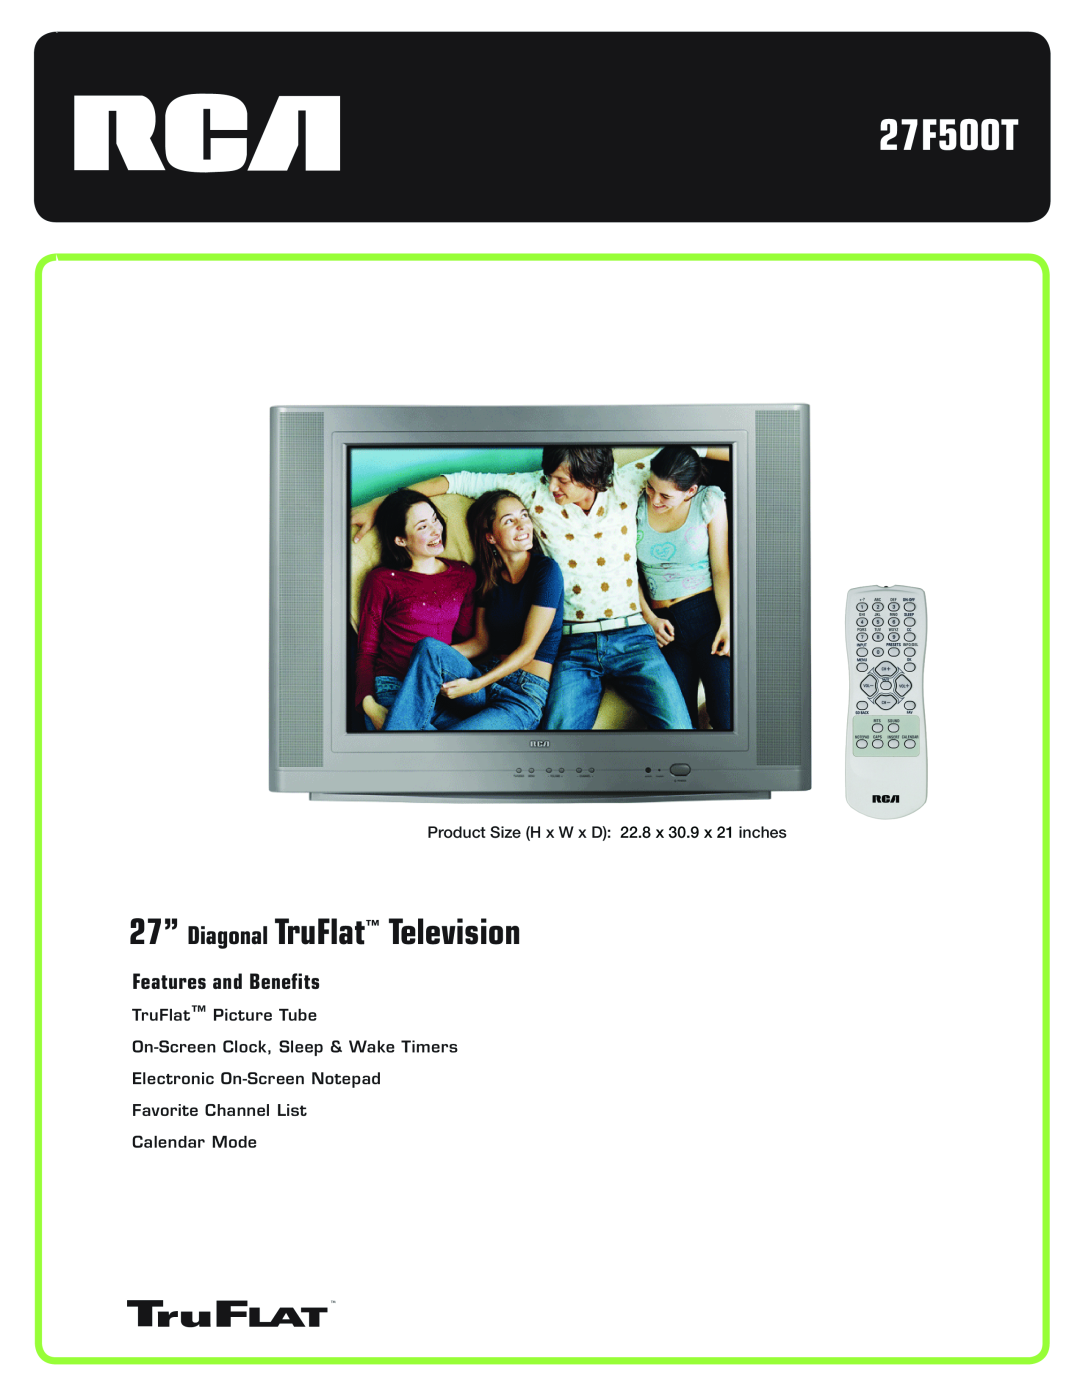 RCA 27F500T manual 27” Diagonal TruFlat Television, Features and Benefits, Product Size H x W x D 22.8 x 30.9 x 21 inches 